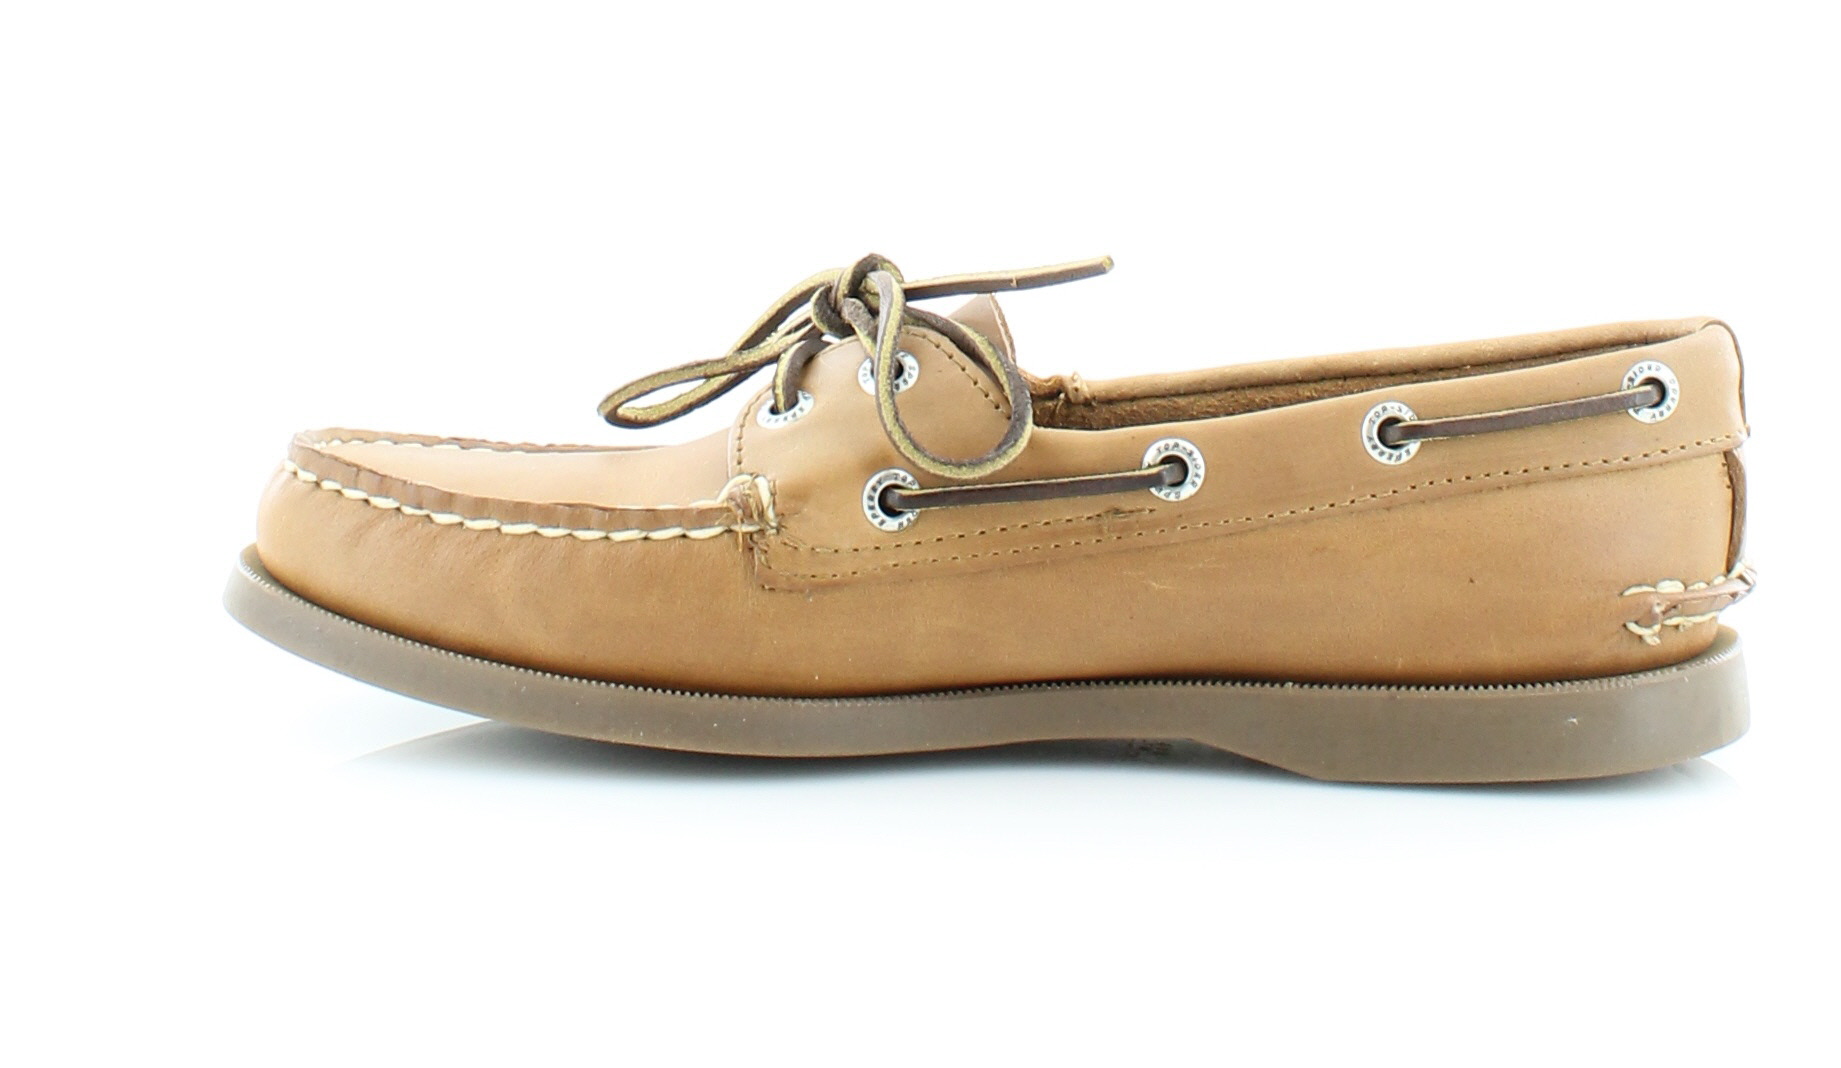 Sperry Top-Sider A/O 2-Eye Women's Loafers & Slip-Ons - image 2 of 5